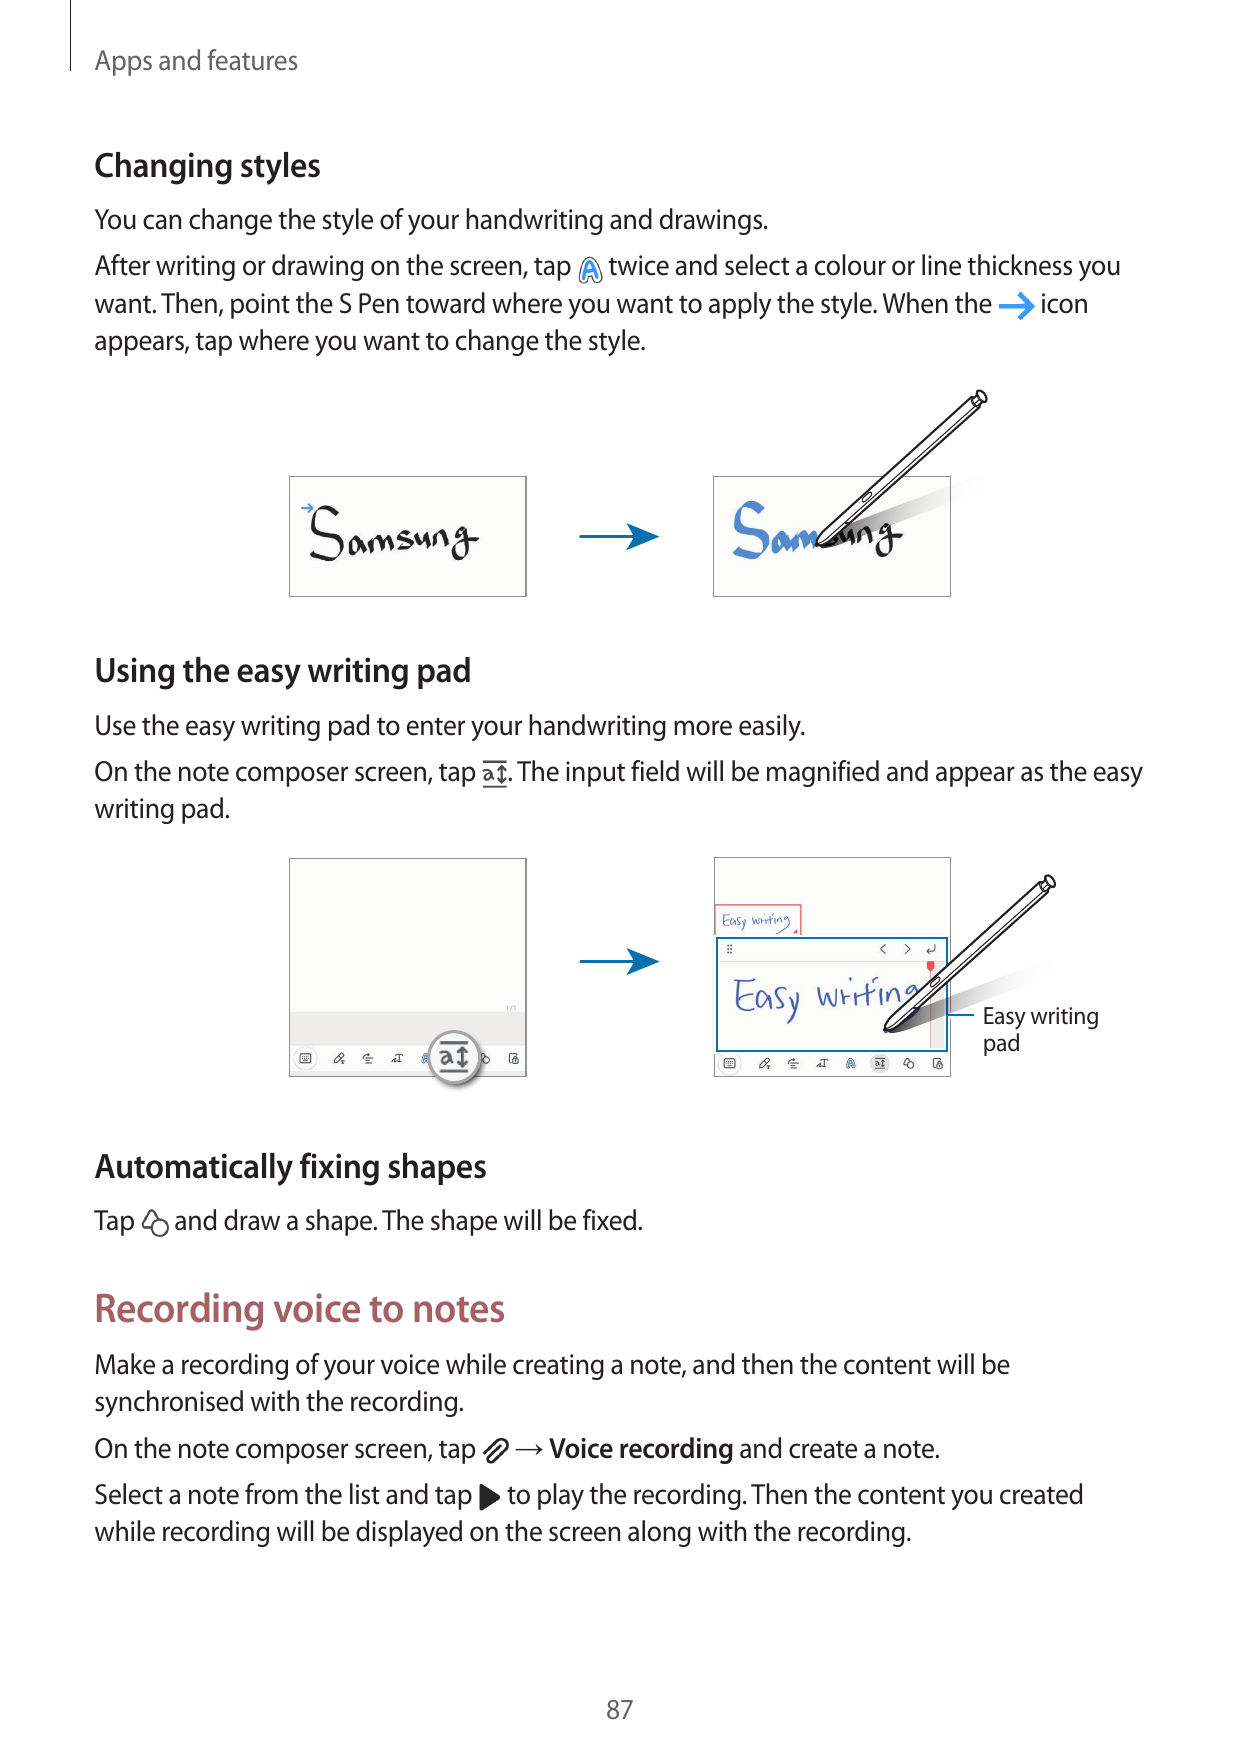 Apps and featuresChanging stylesYou can change the style of your handwriting and drawings.After writing or drawing on the screen